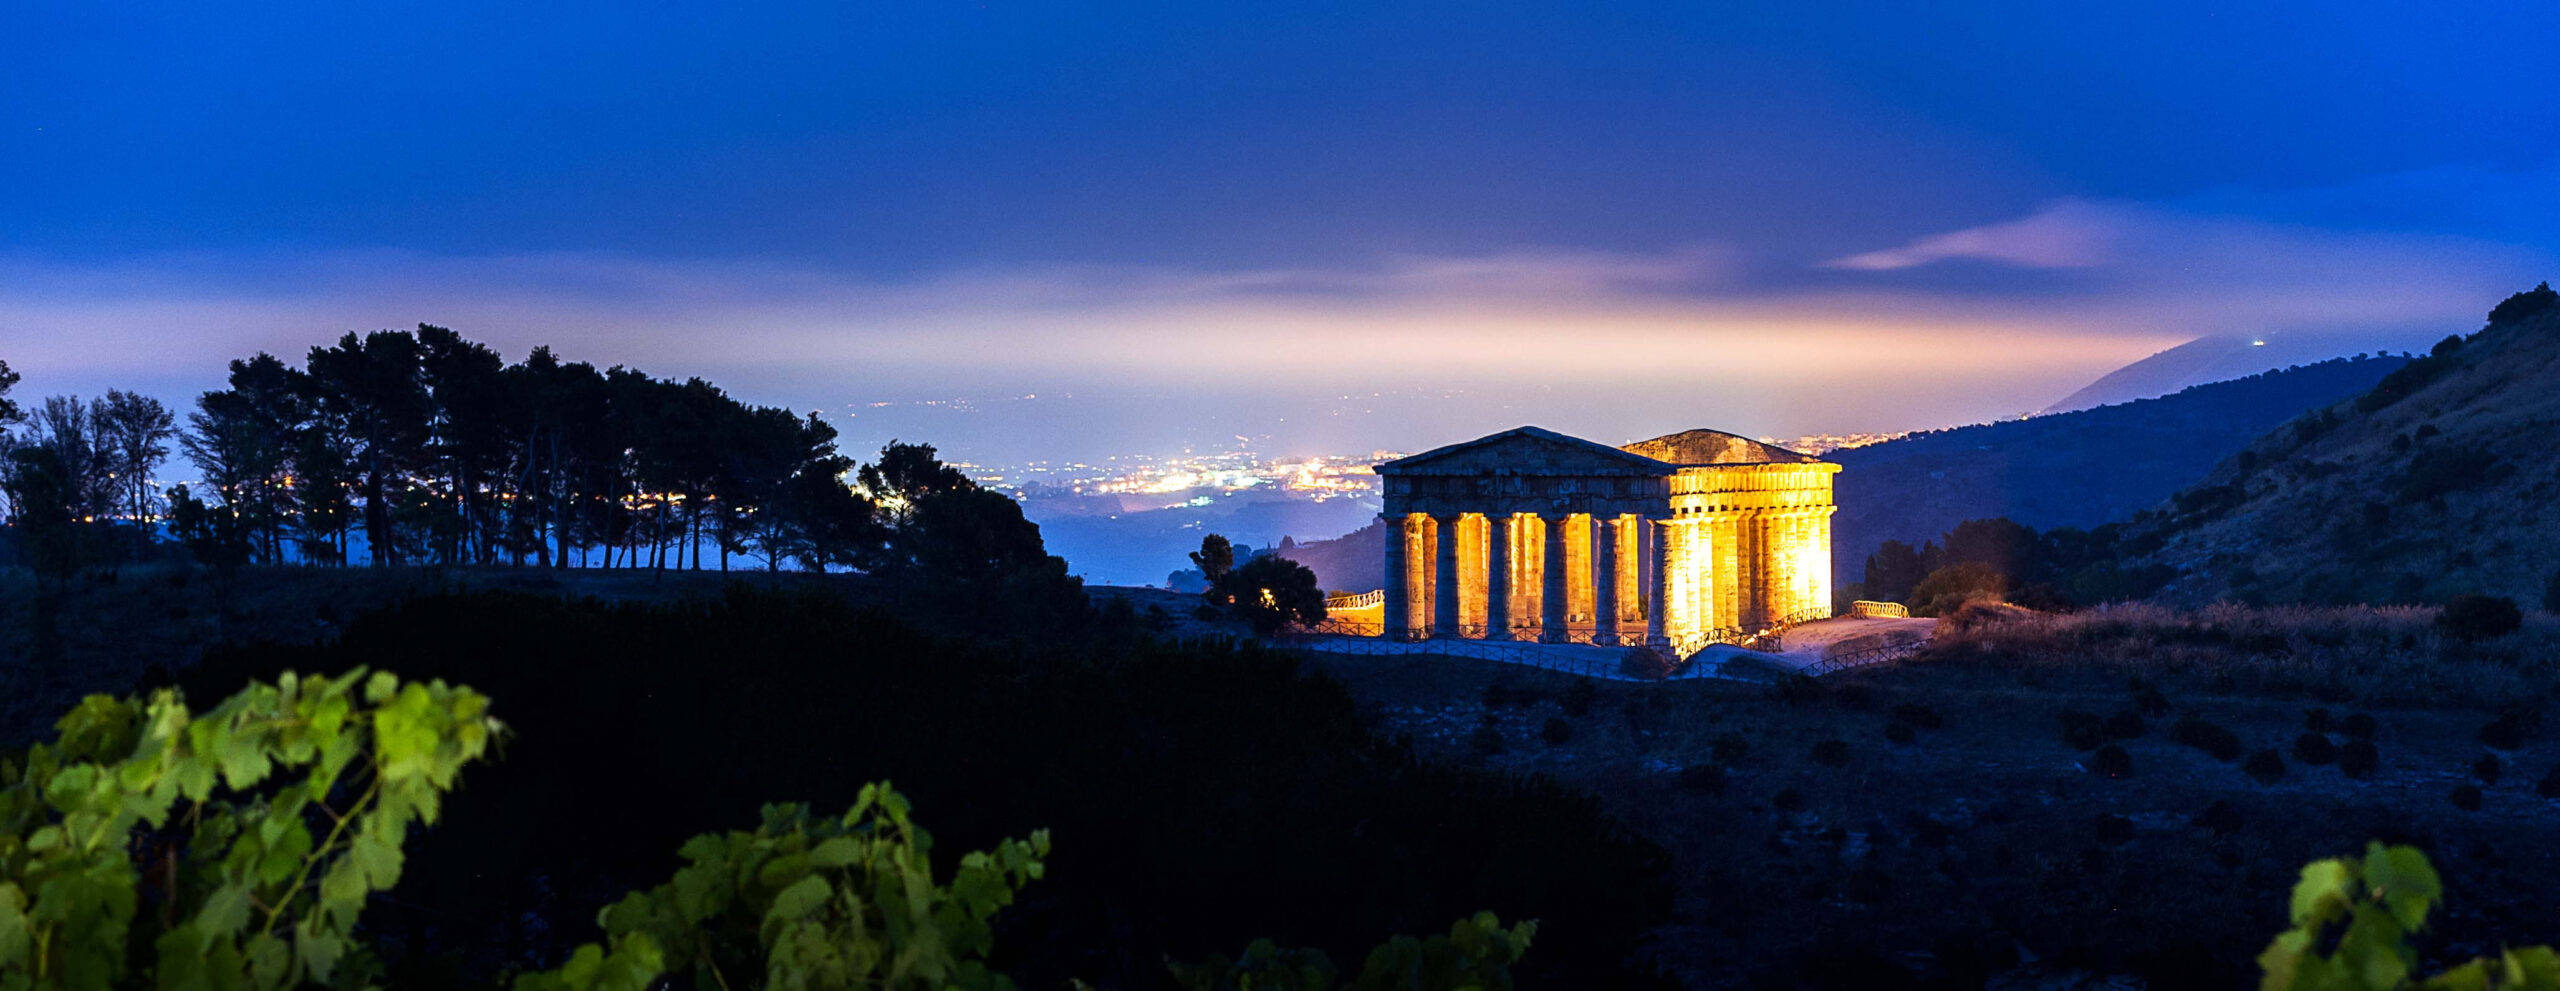 The Greek temples of Sicily